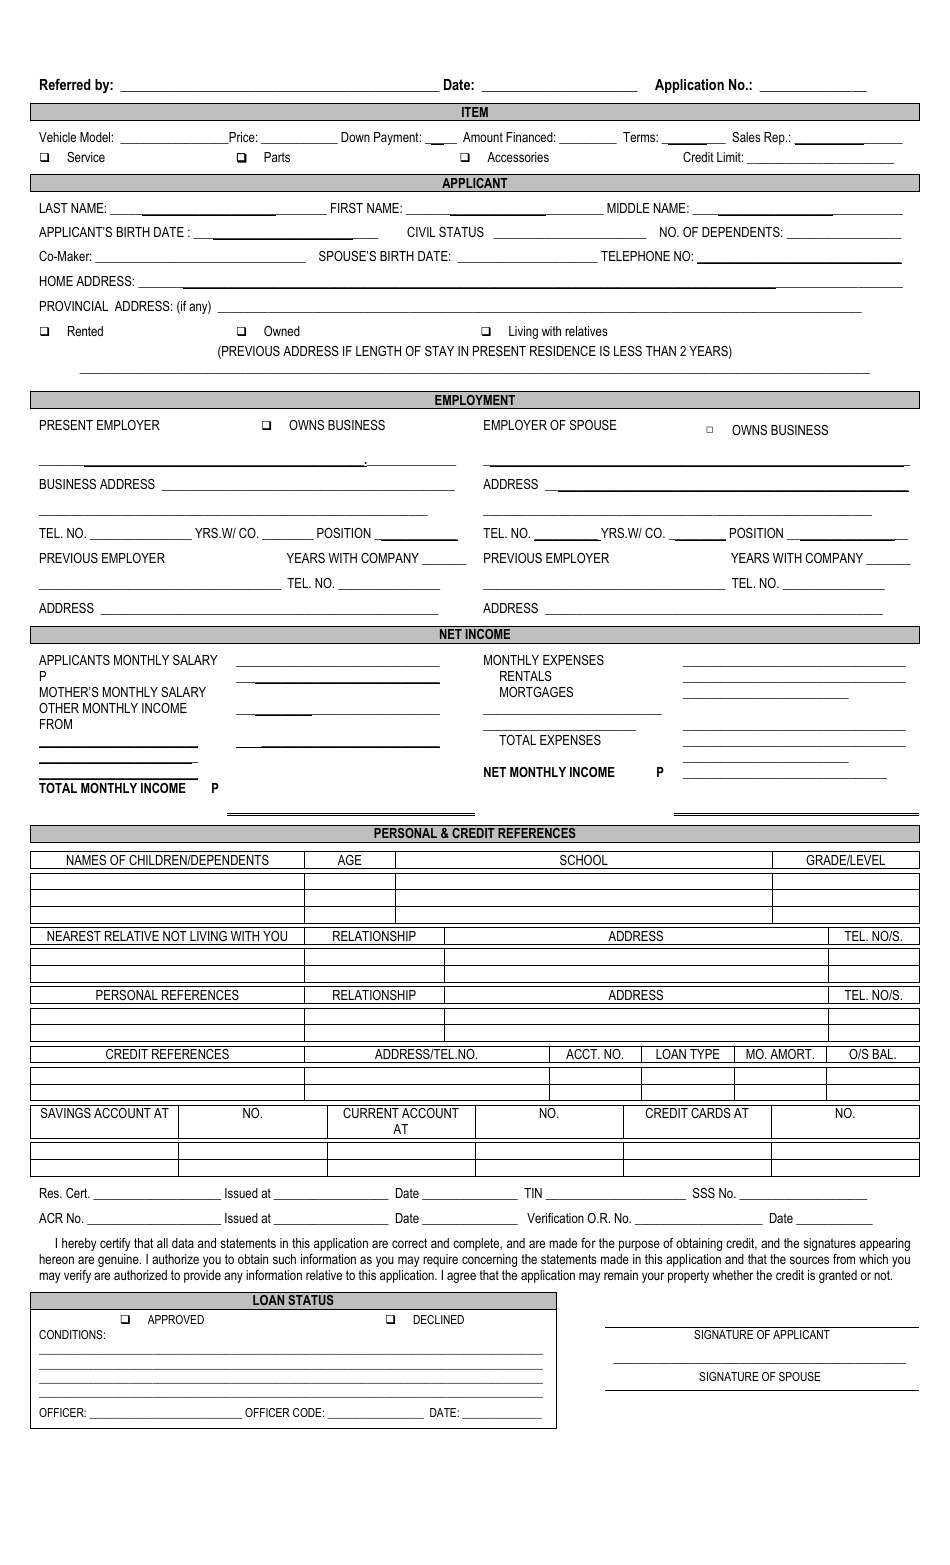 Individual Loan Application Form, Page 1